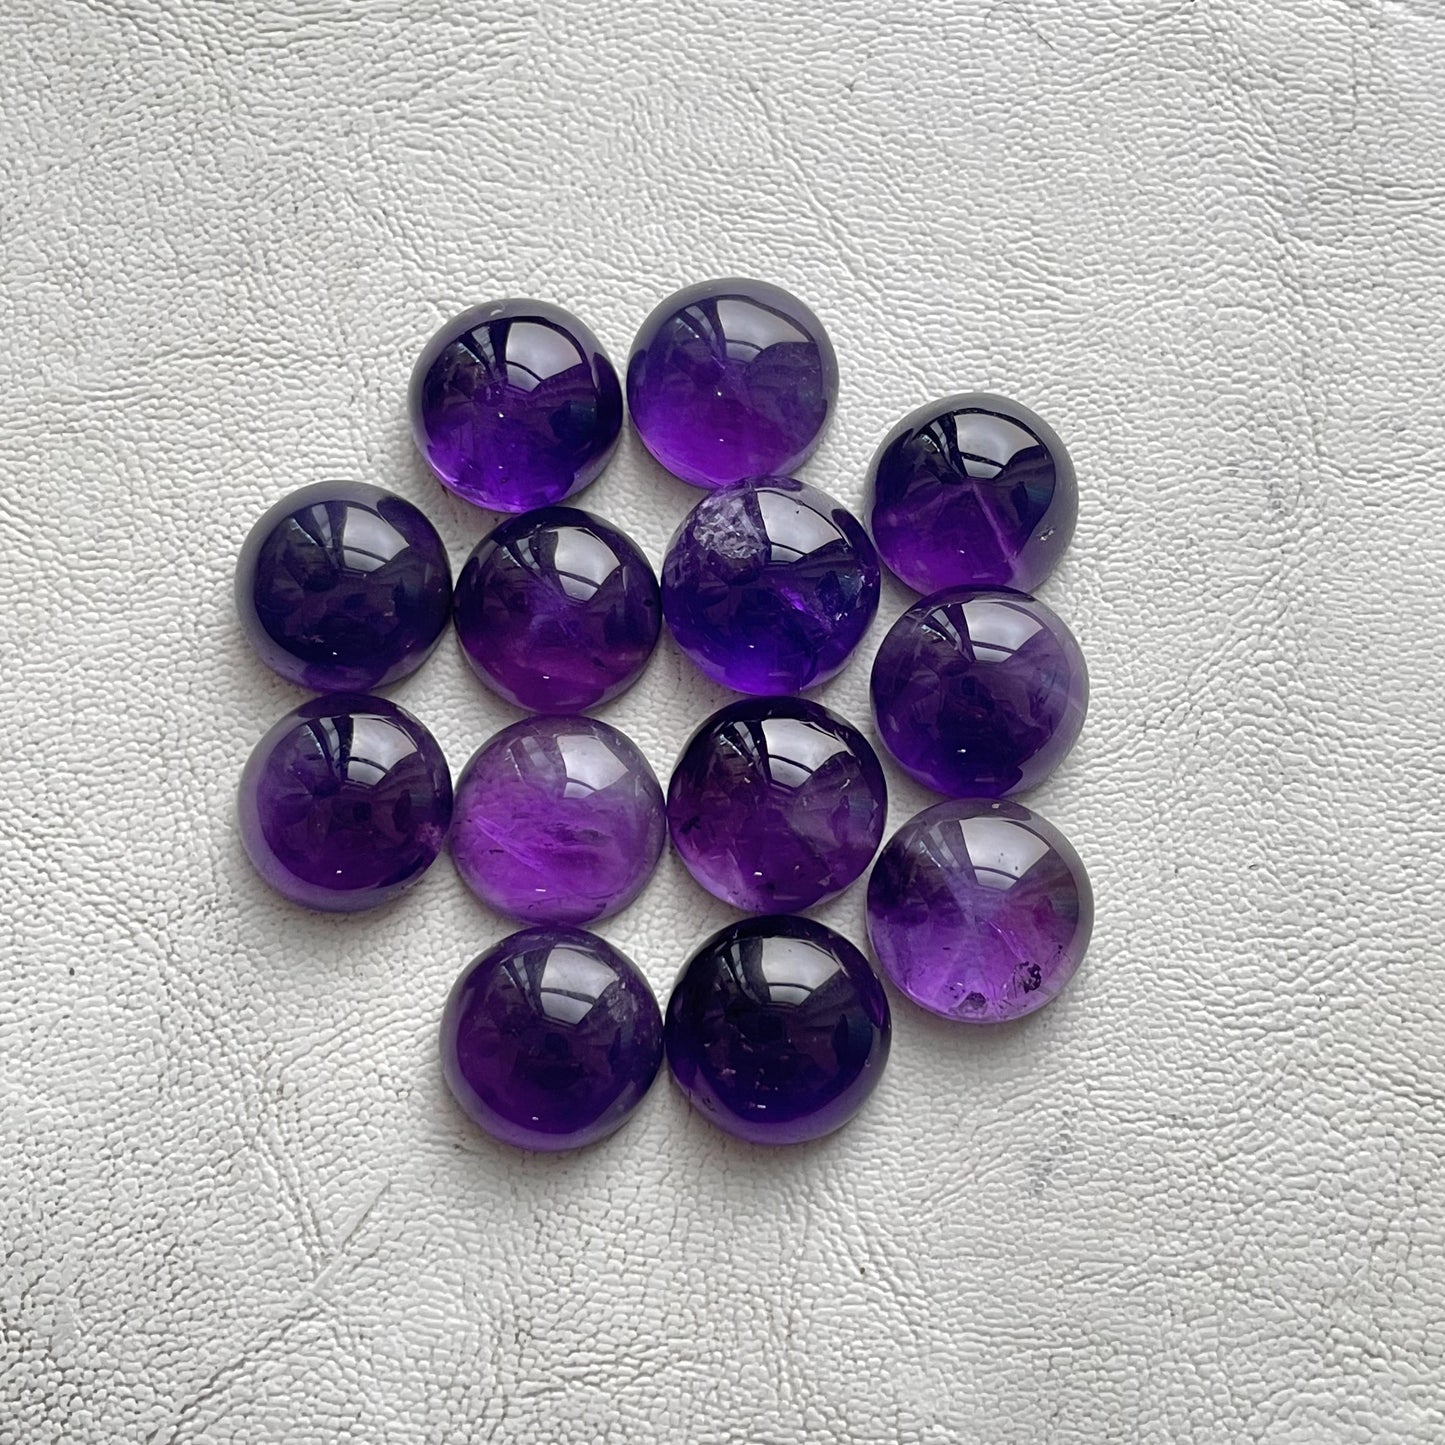 Best Quality of Purple Amethyst 15 mm Round Cabochon